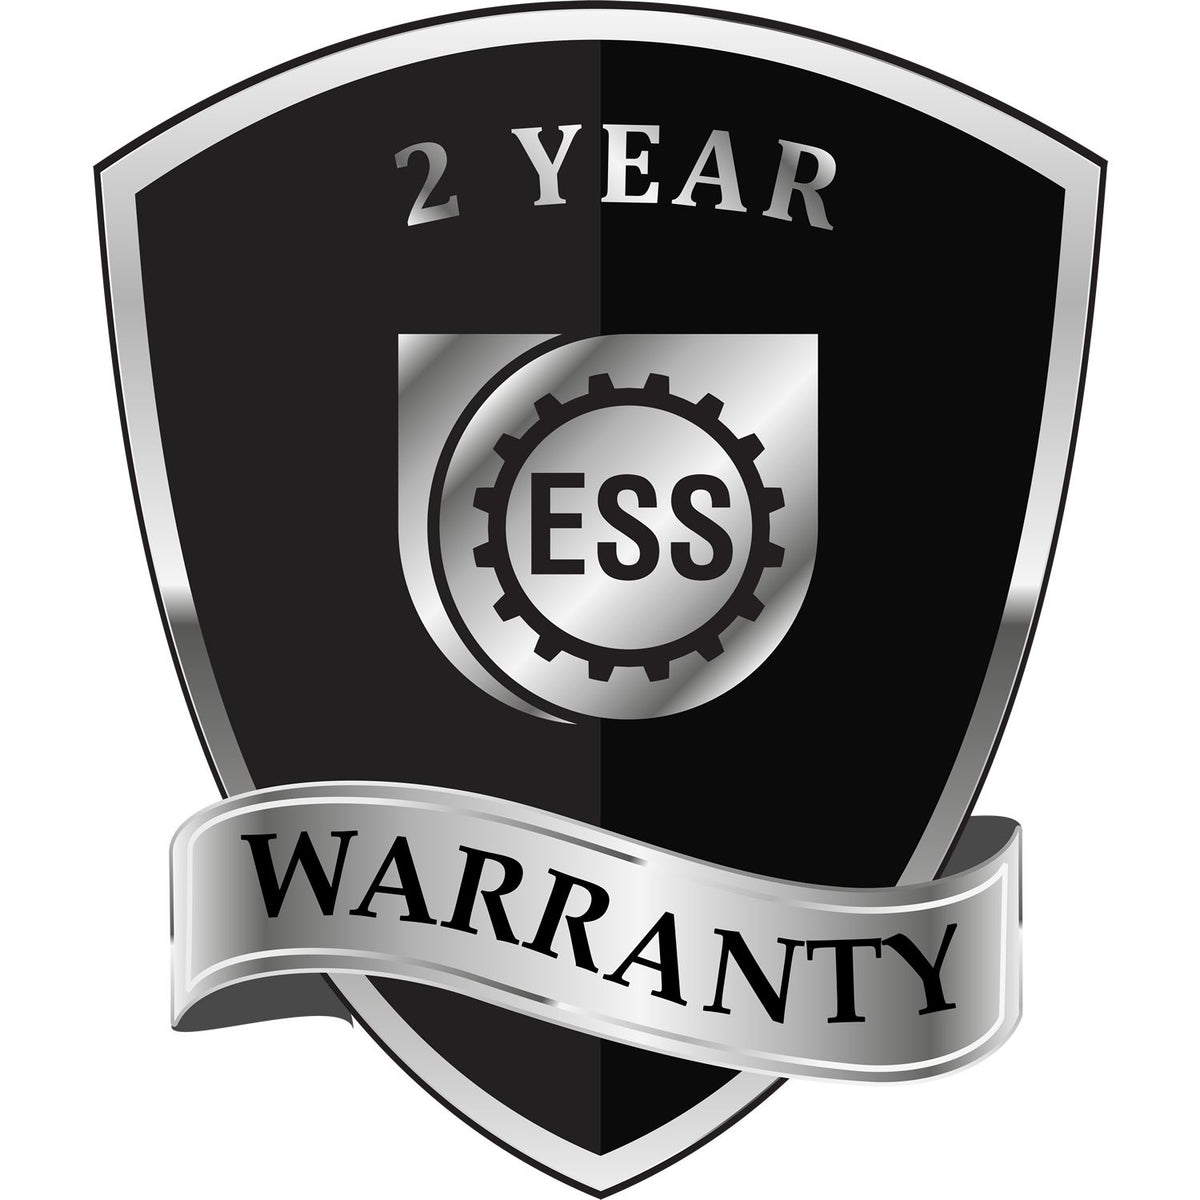 A black and silver badge or emblem showing warranty information for the Handheld Colorado Professional Geologist Embosser